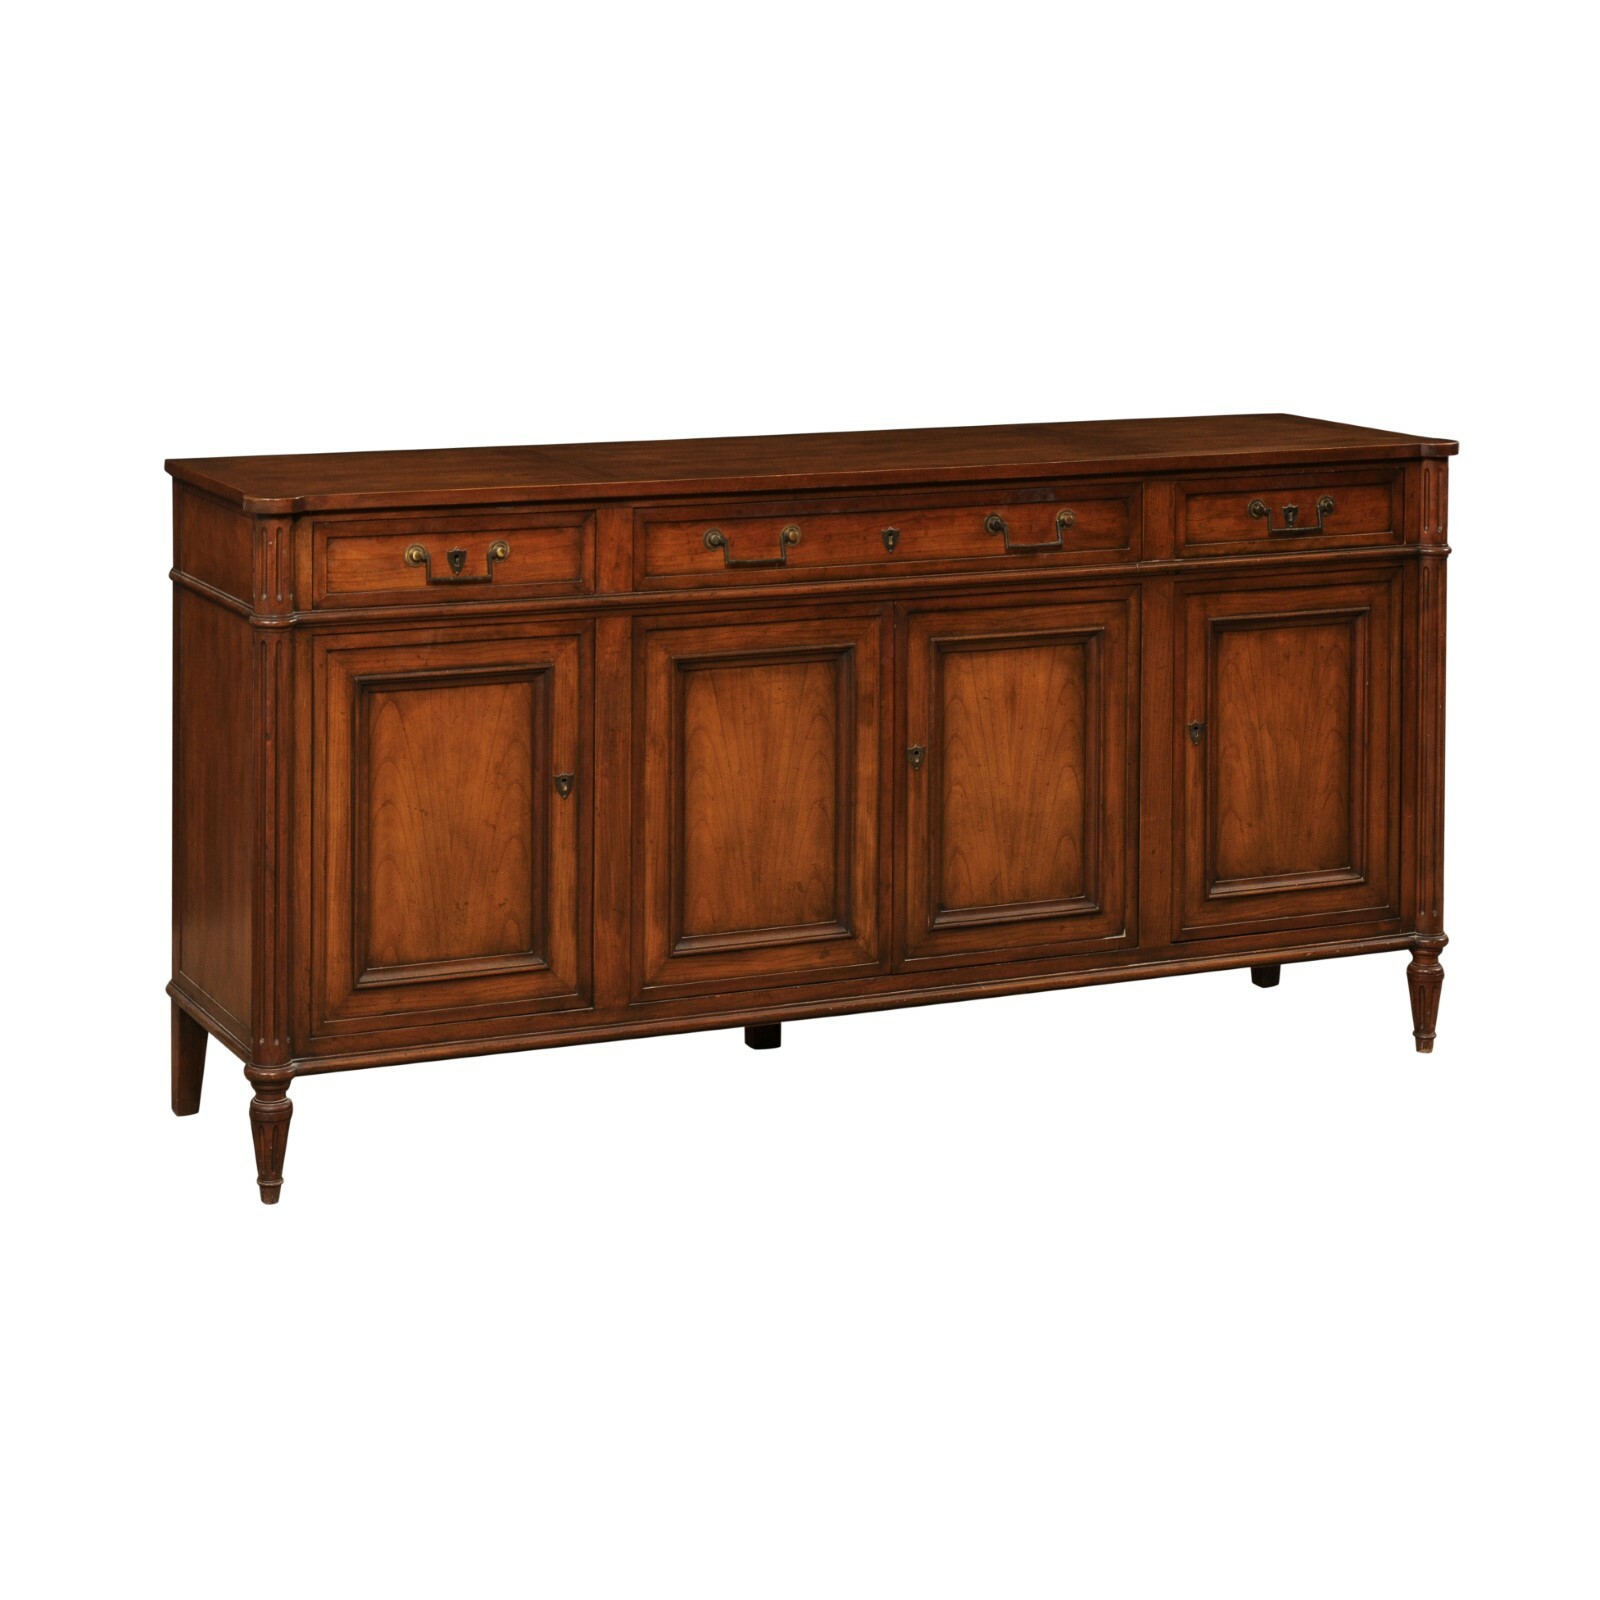 French Style Buffet Cabinet, 6 Ft. Long